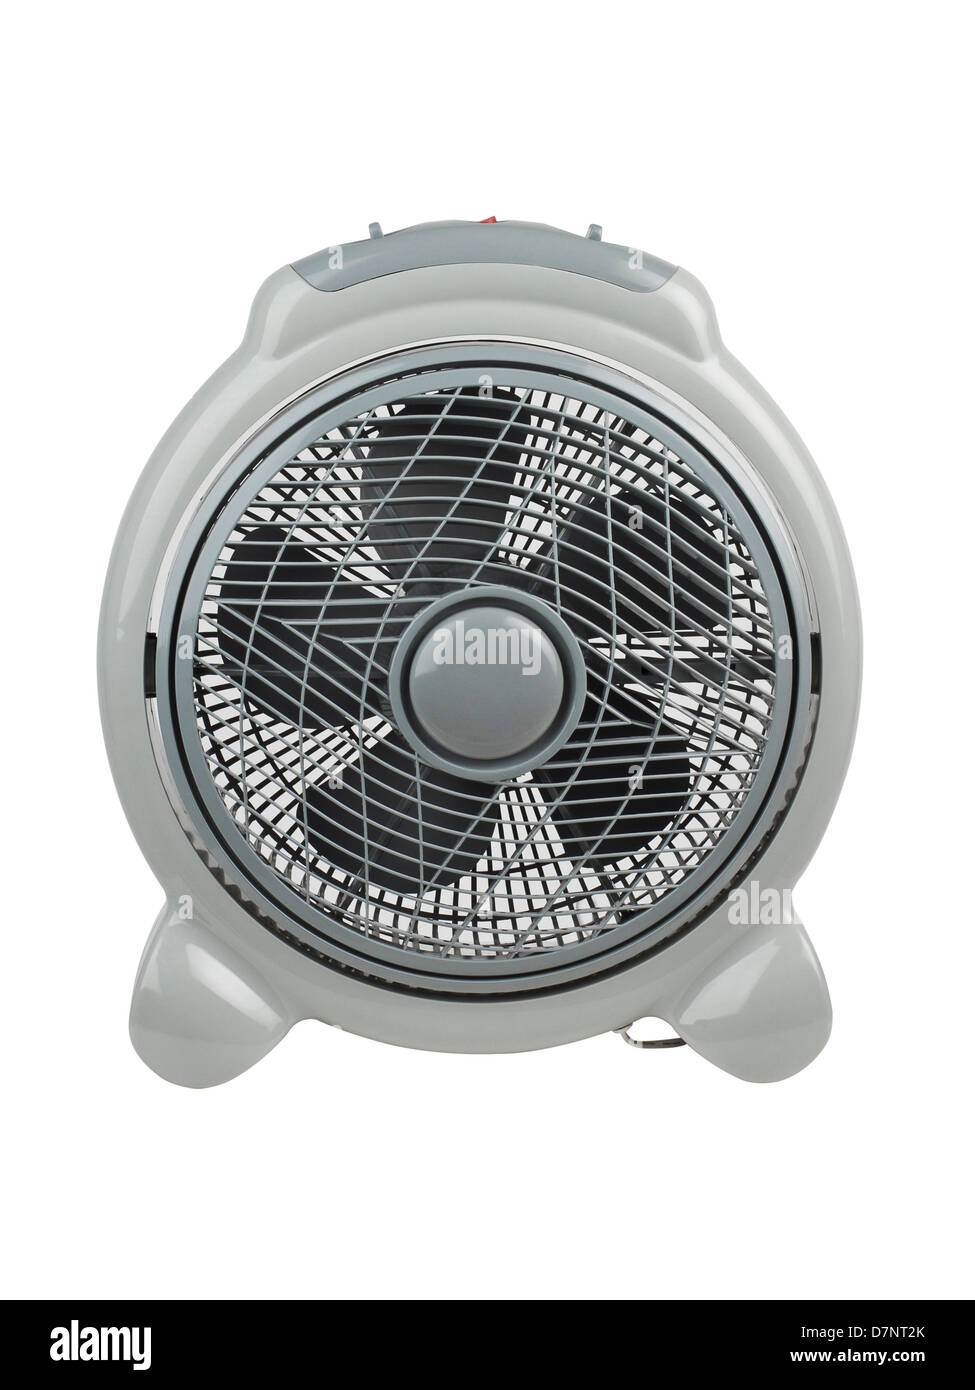 Compact electric fan in gray color Stock Photo